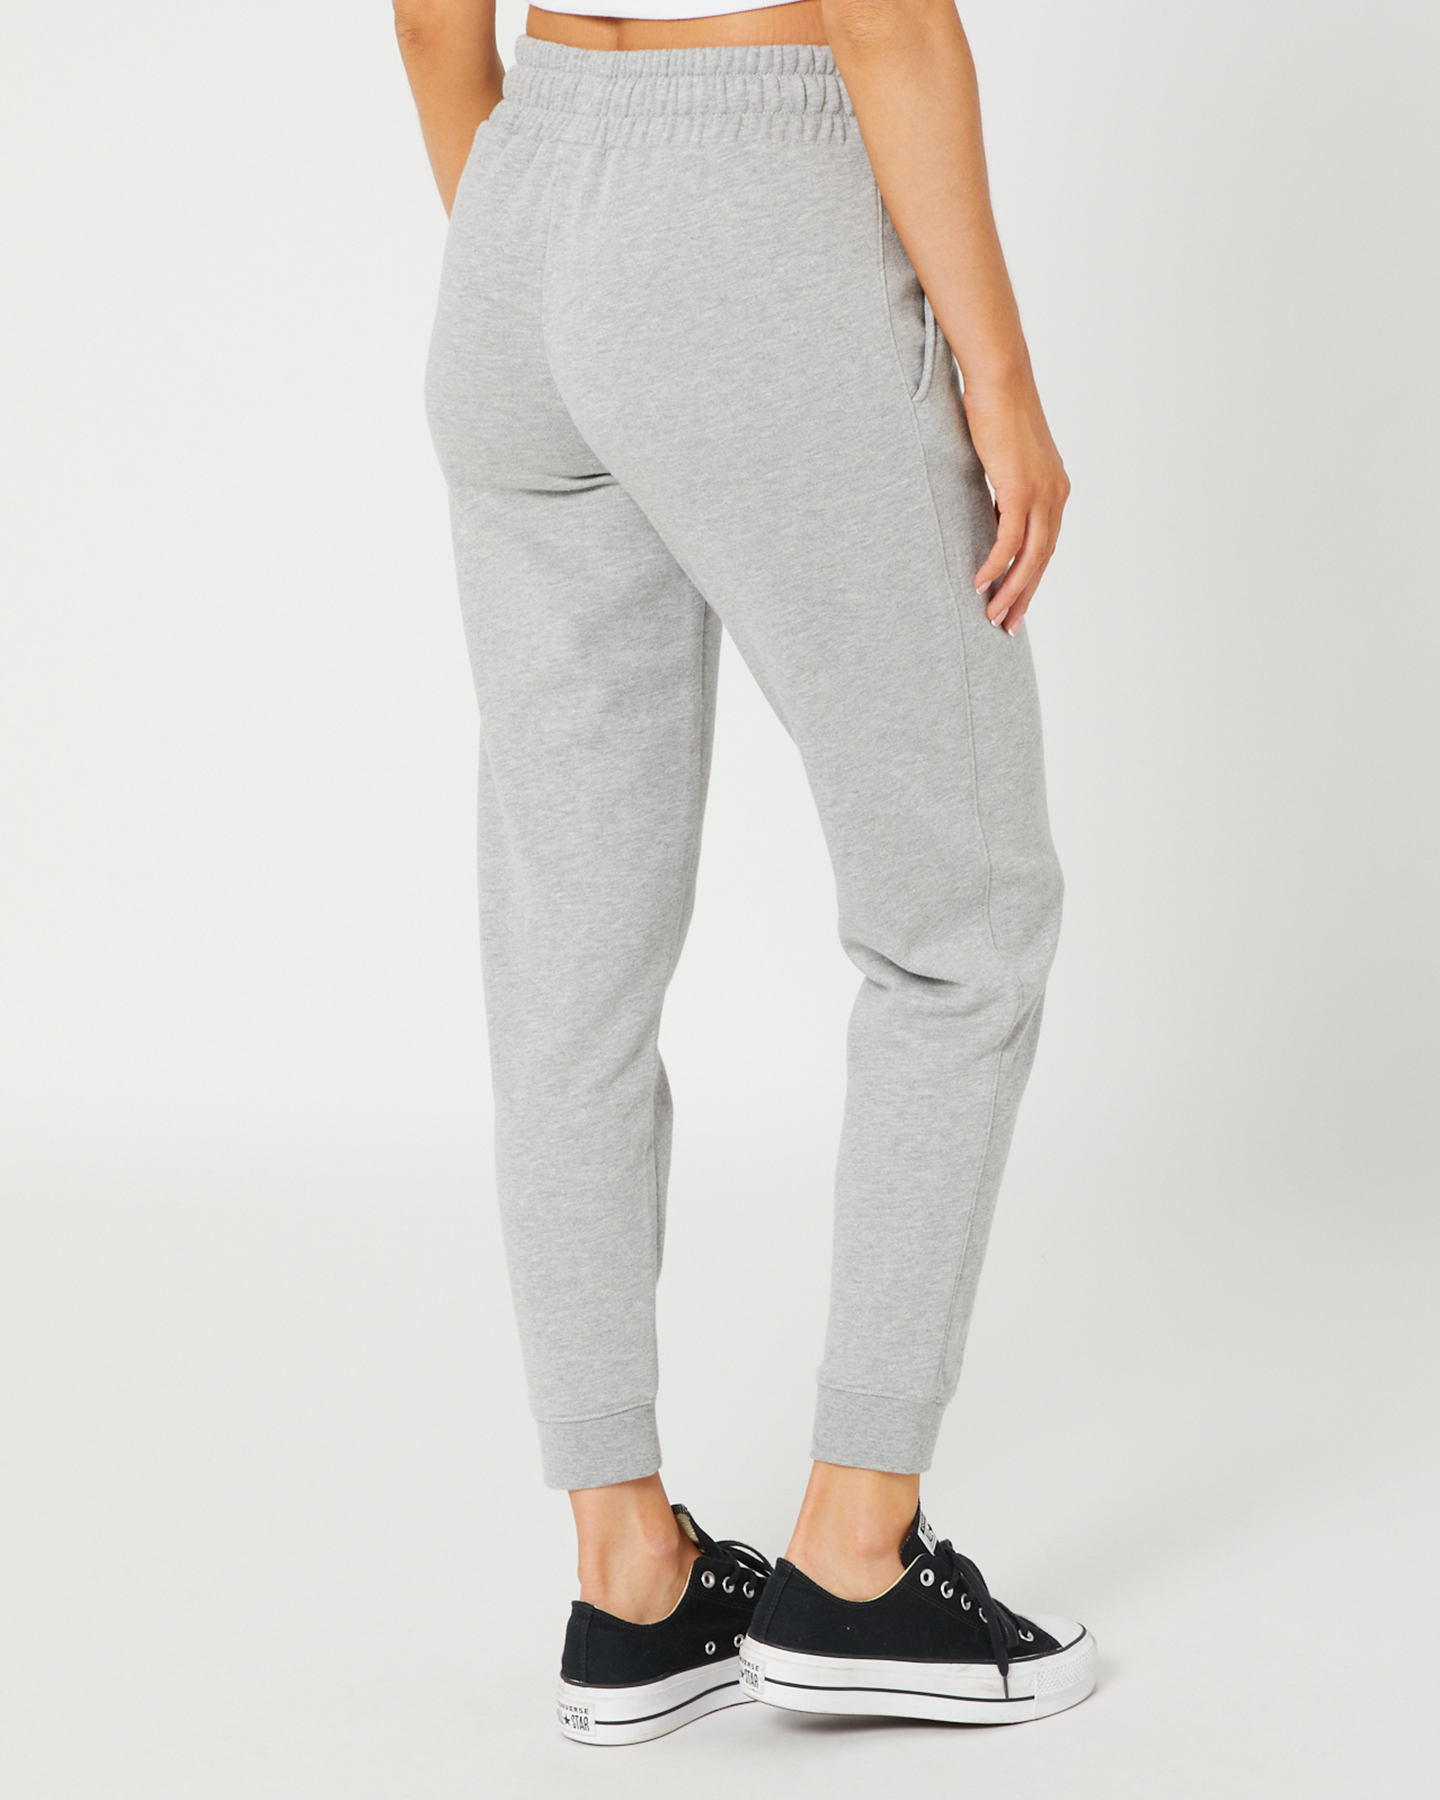 Hurley Oao Core Cuff Trackpant - Dark Grey Heather | SurfStitch